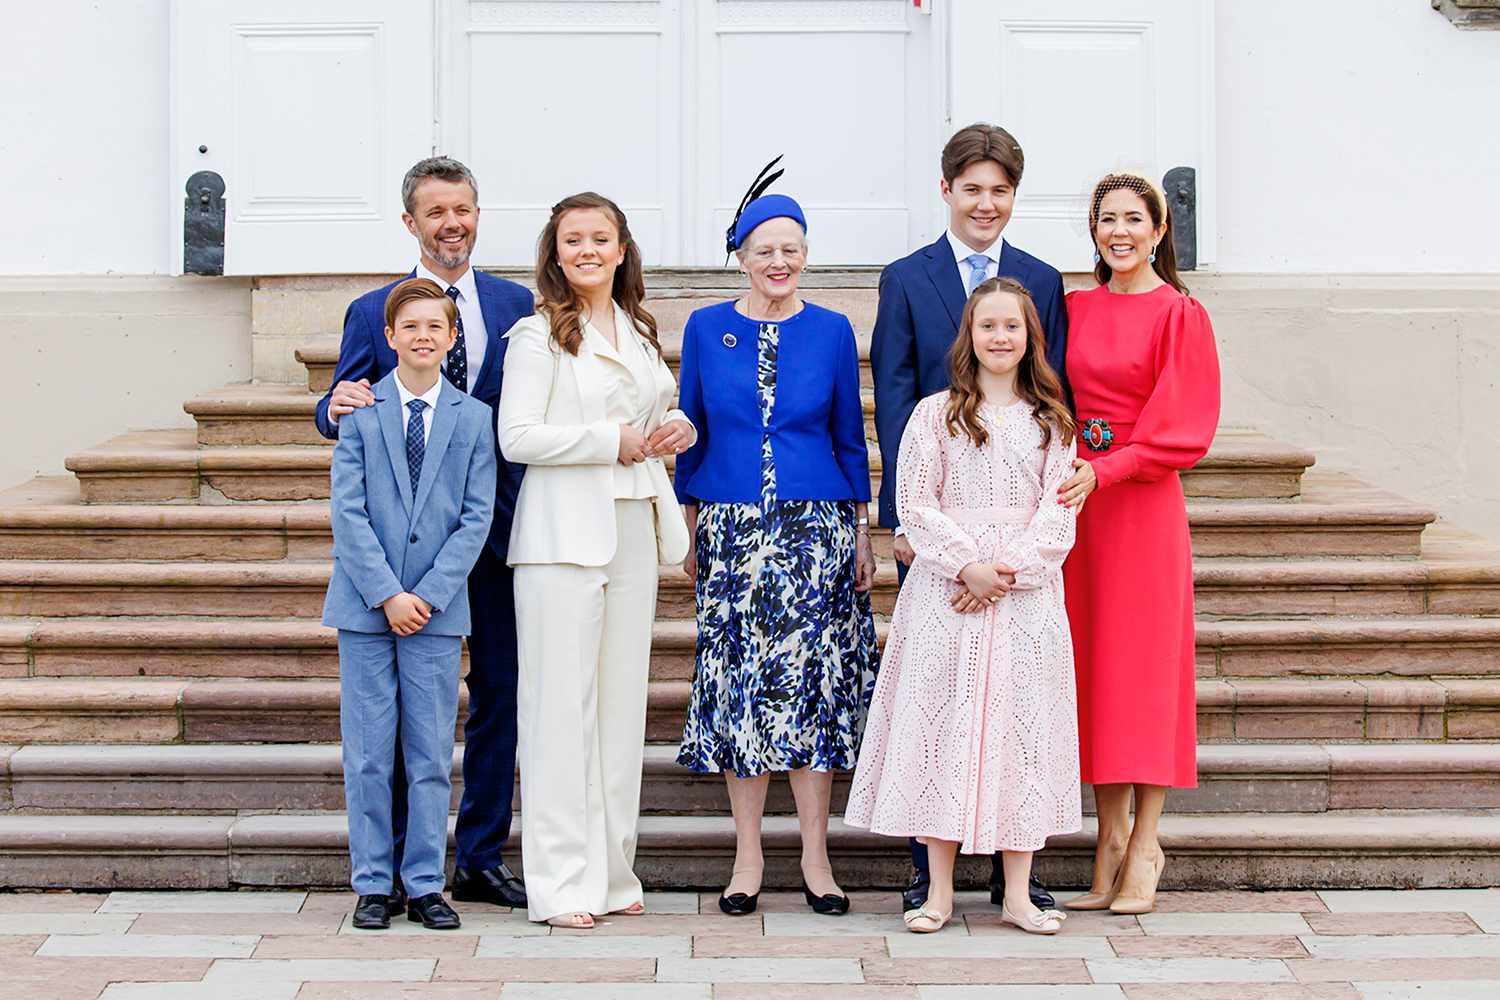 Queen Margrethe of Denmark, Crown Prince Frederik of Denmark, Crown Princess Mary of Denmark, Prince Christian of Denmark, Princess Isabella of Denmark, Princess Josephine of Denmark and Prince Vincent of Denmark during the confirmation of Princess Isabella of Denmark at on April 30, 2022 in Fredensborg, Denmark